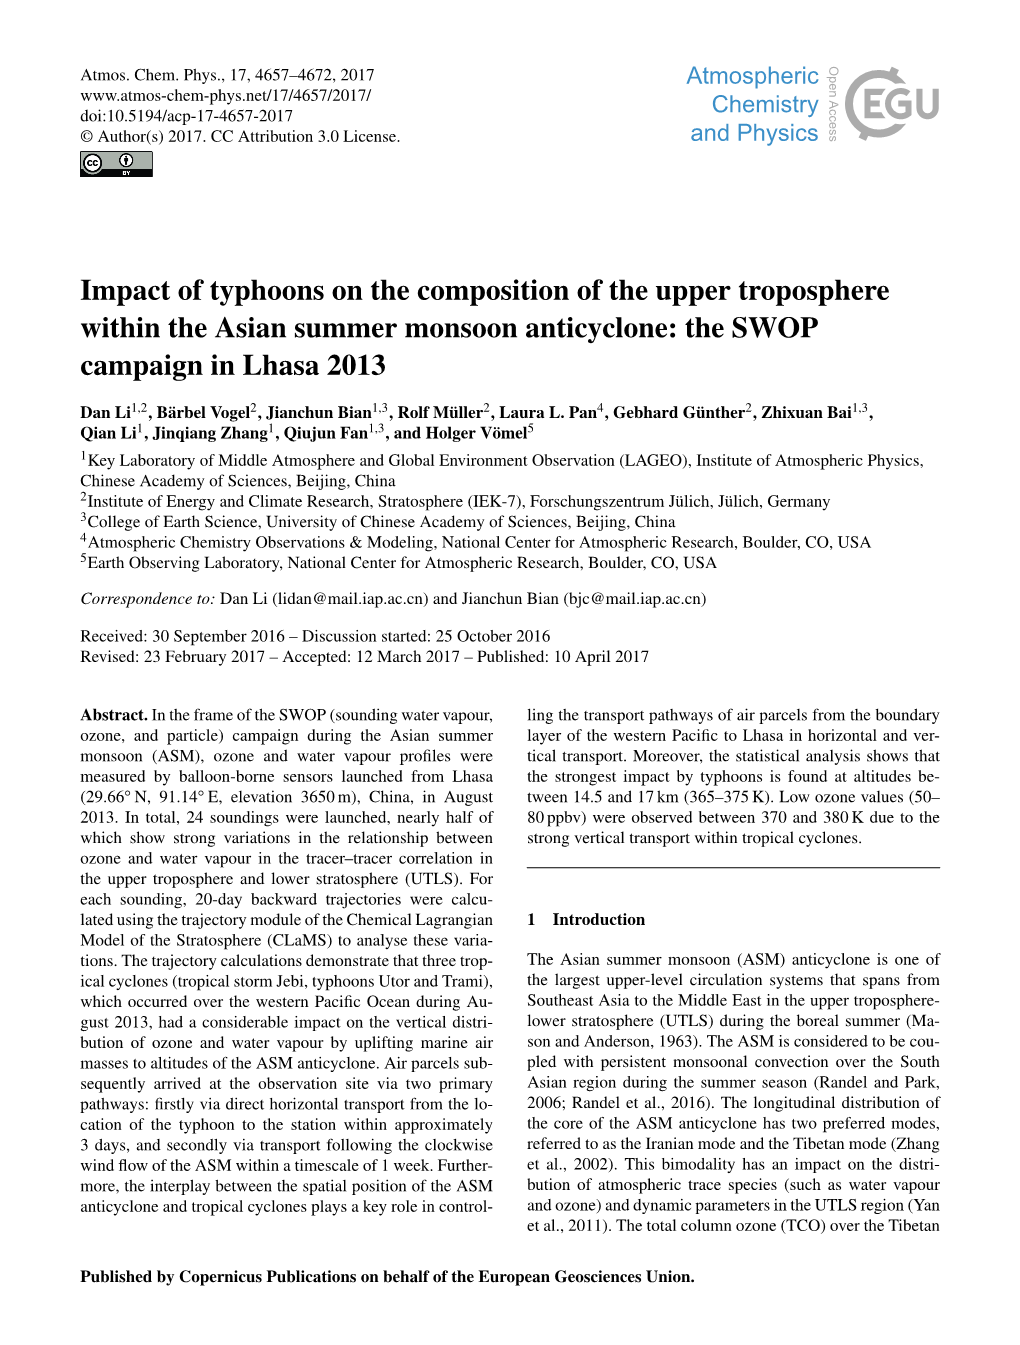 Impact of Typhoons on the Composition of the Upper Troposphere Within the Asian Summer Monsoon Anticyclone: the SWOP Campaign in Lhasa 2013